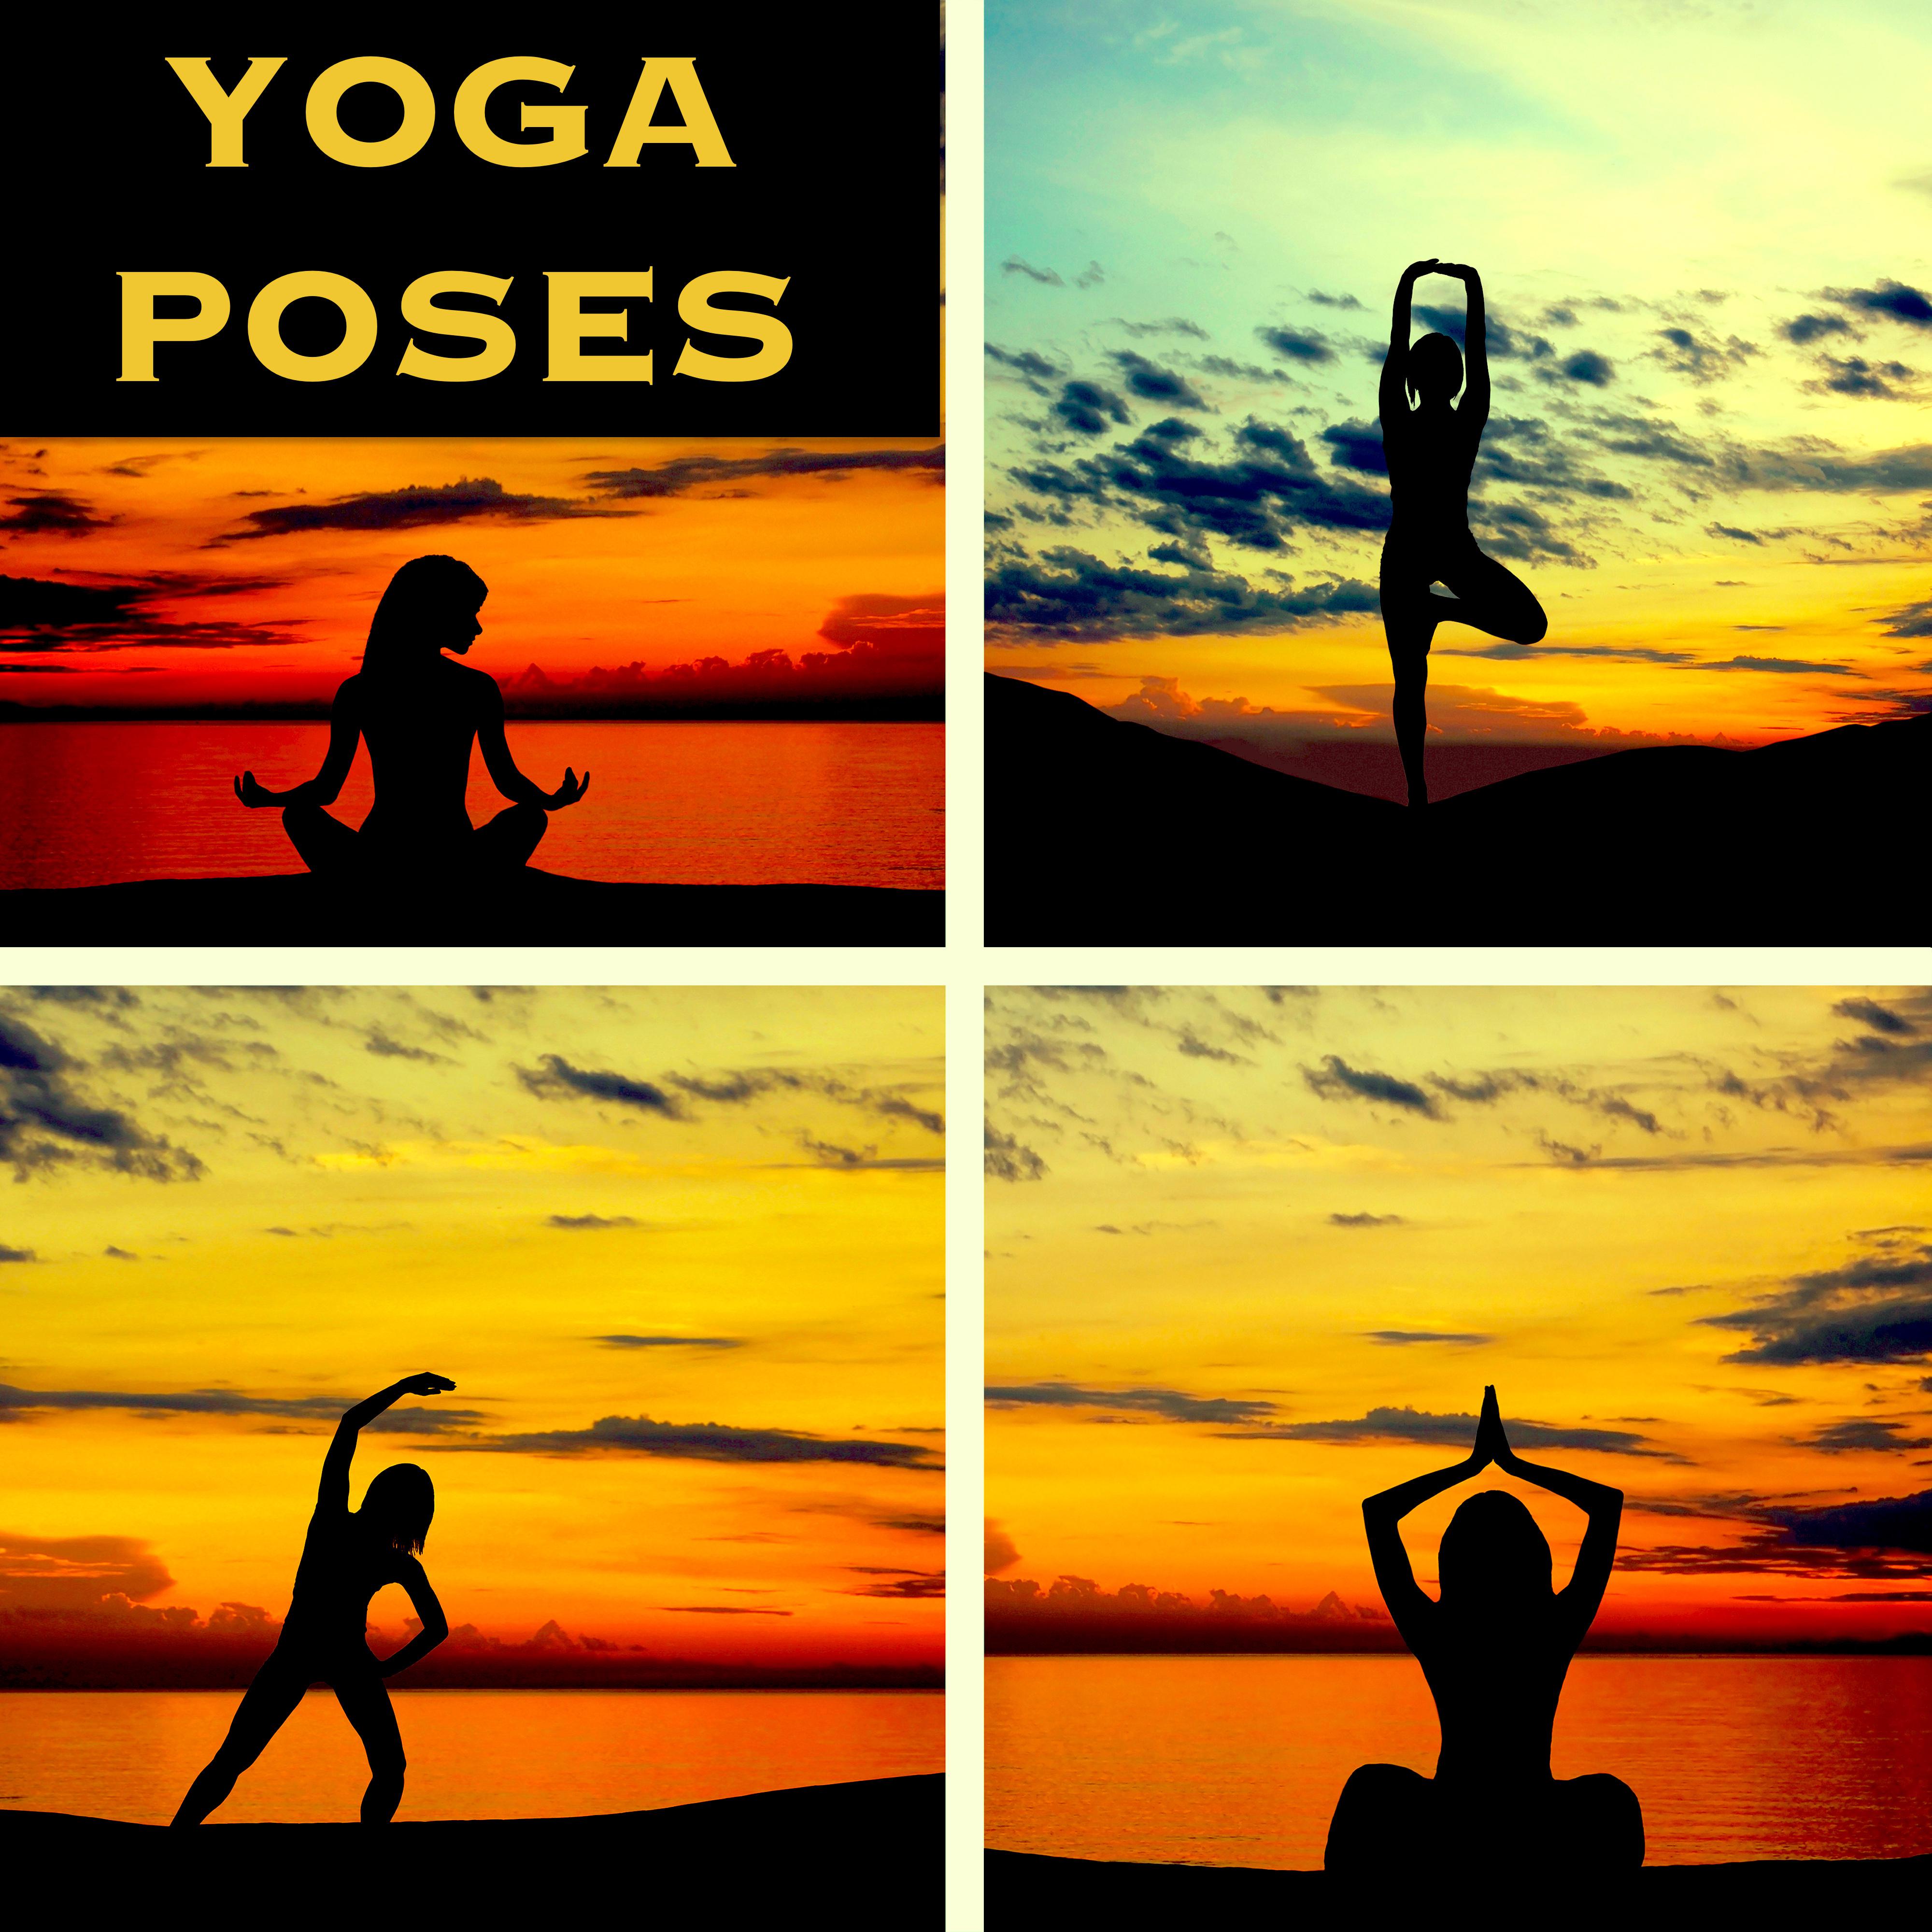 Yoga Poses  Songs for Yoga Class, Relaxation, Concentration  Mindfulness Meditation